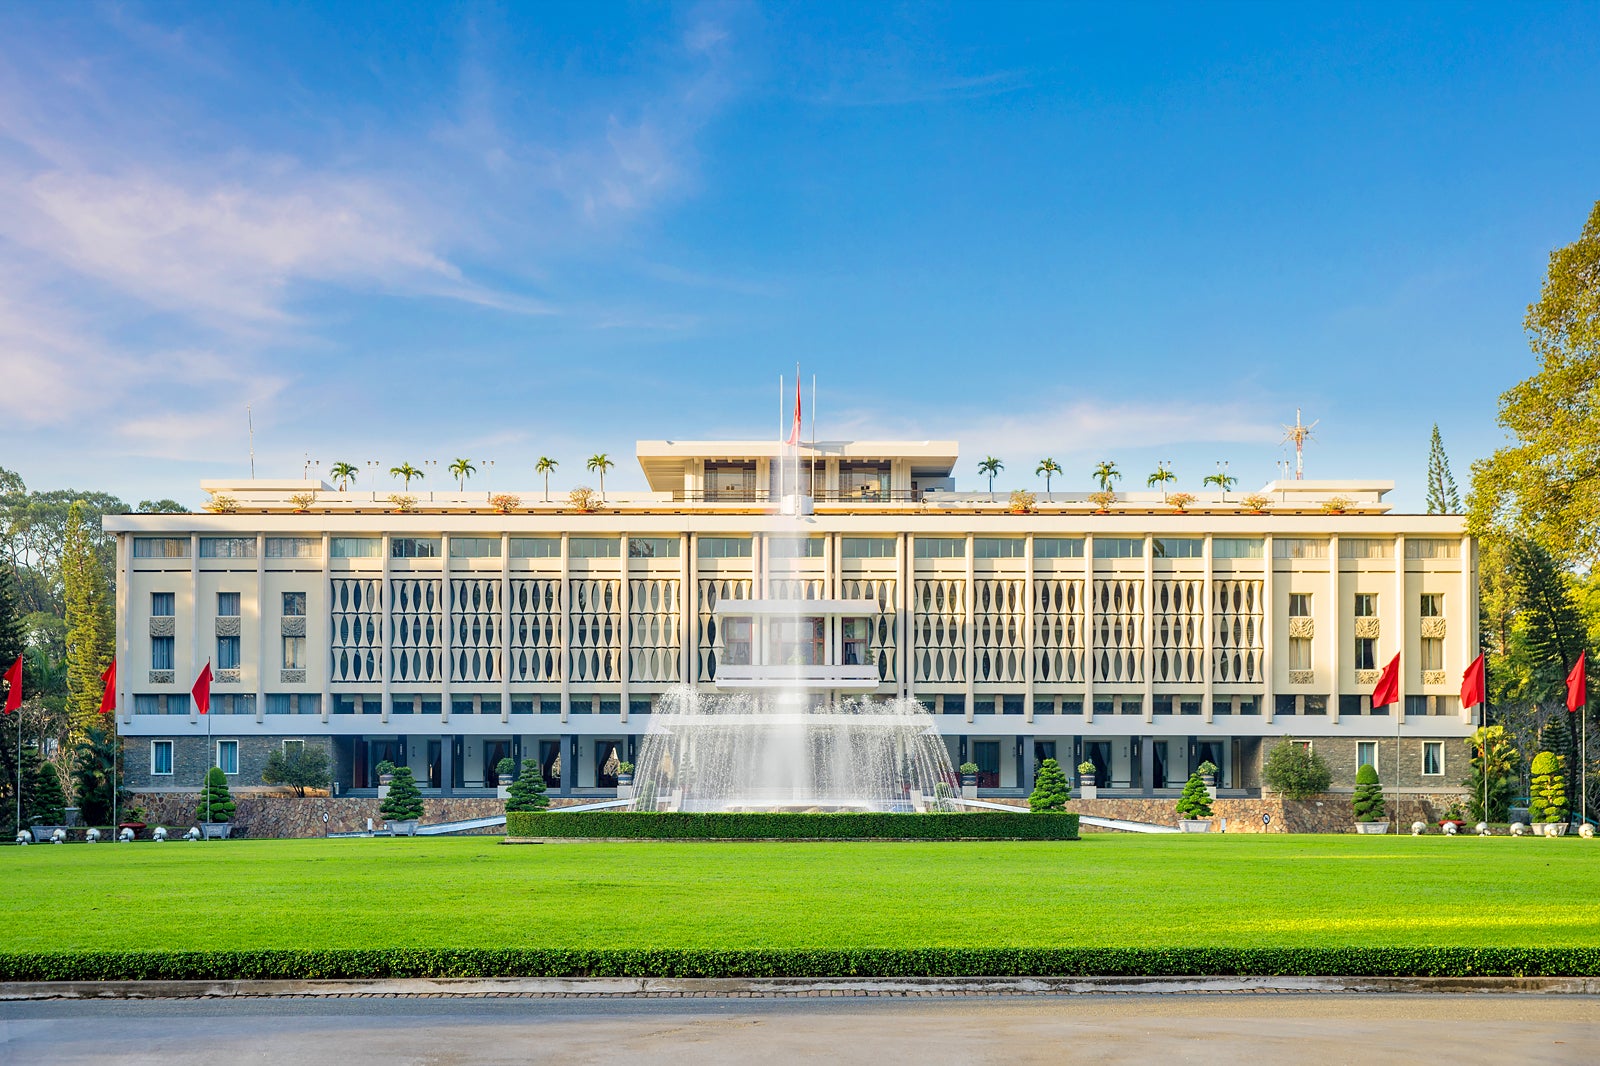 Visit Independence Palace - an important historical landmark